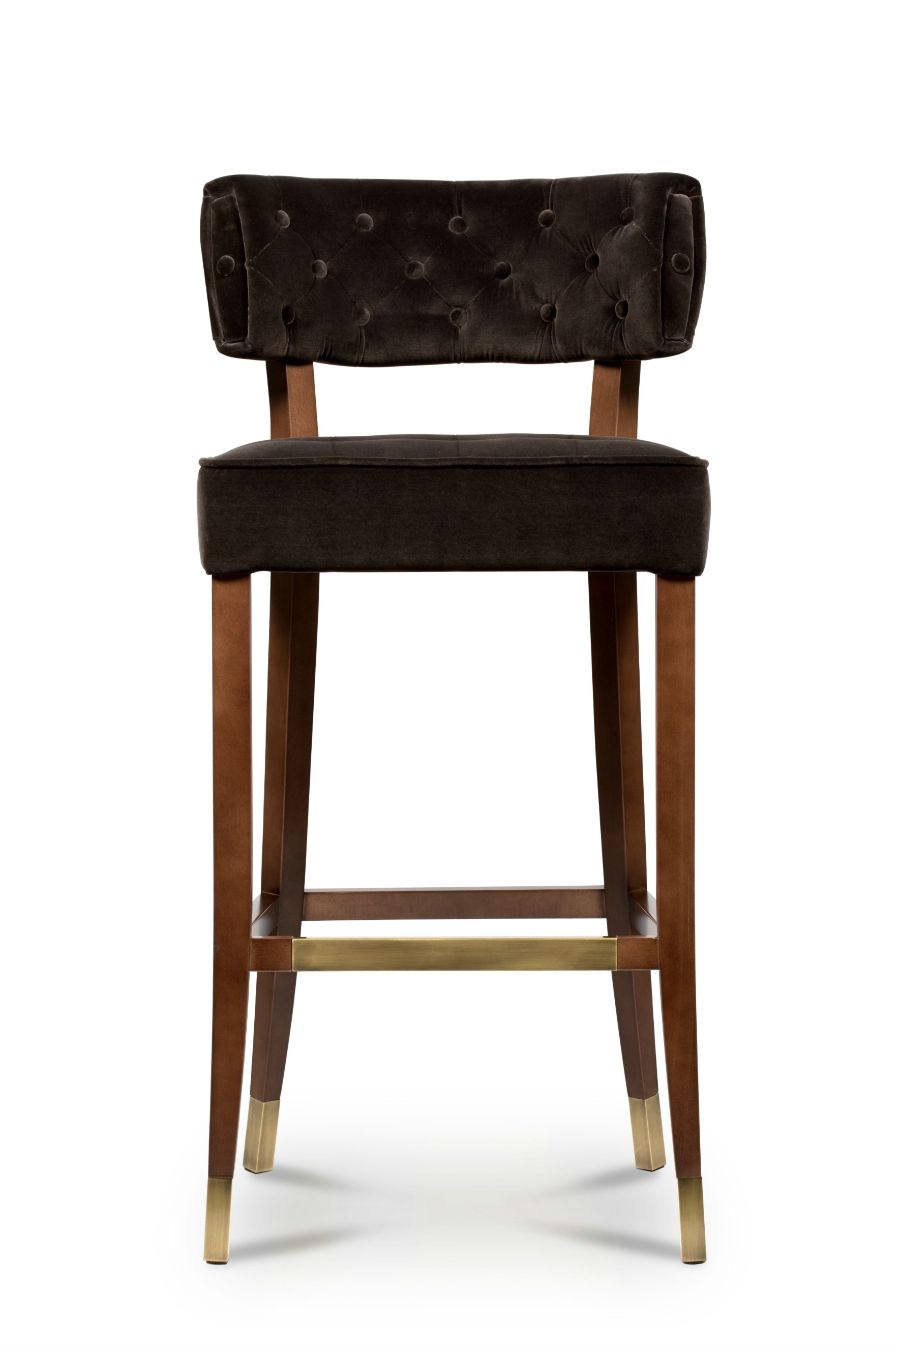 Bar Chairs: Best Sellers That Will Turn Your Bar Design Amazing